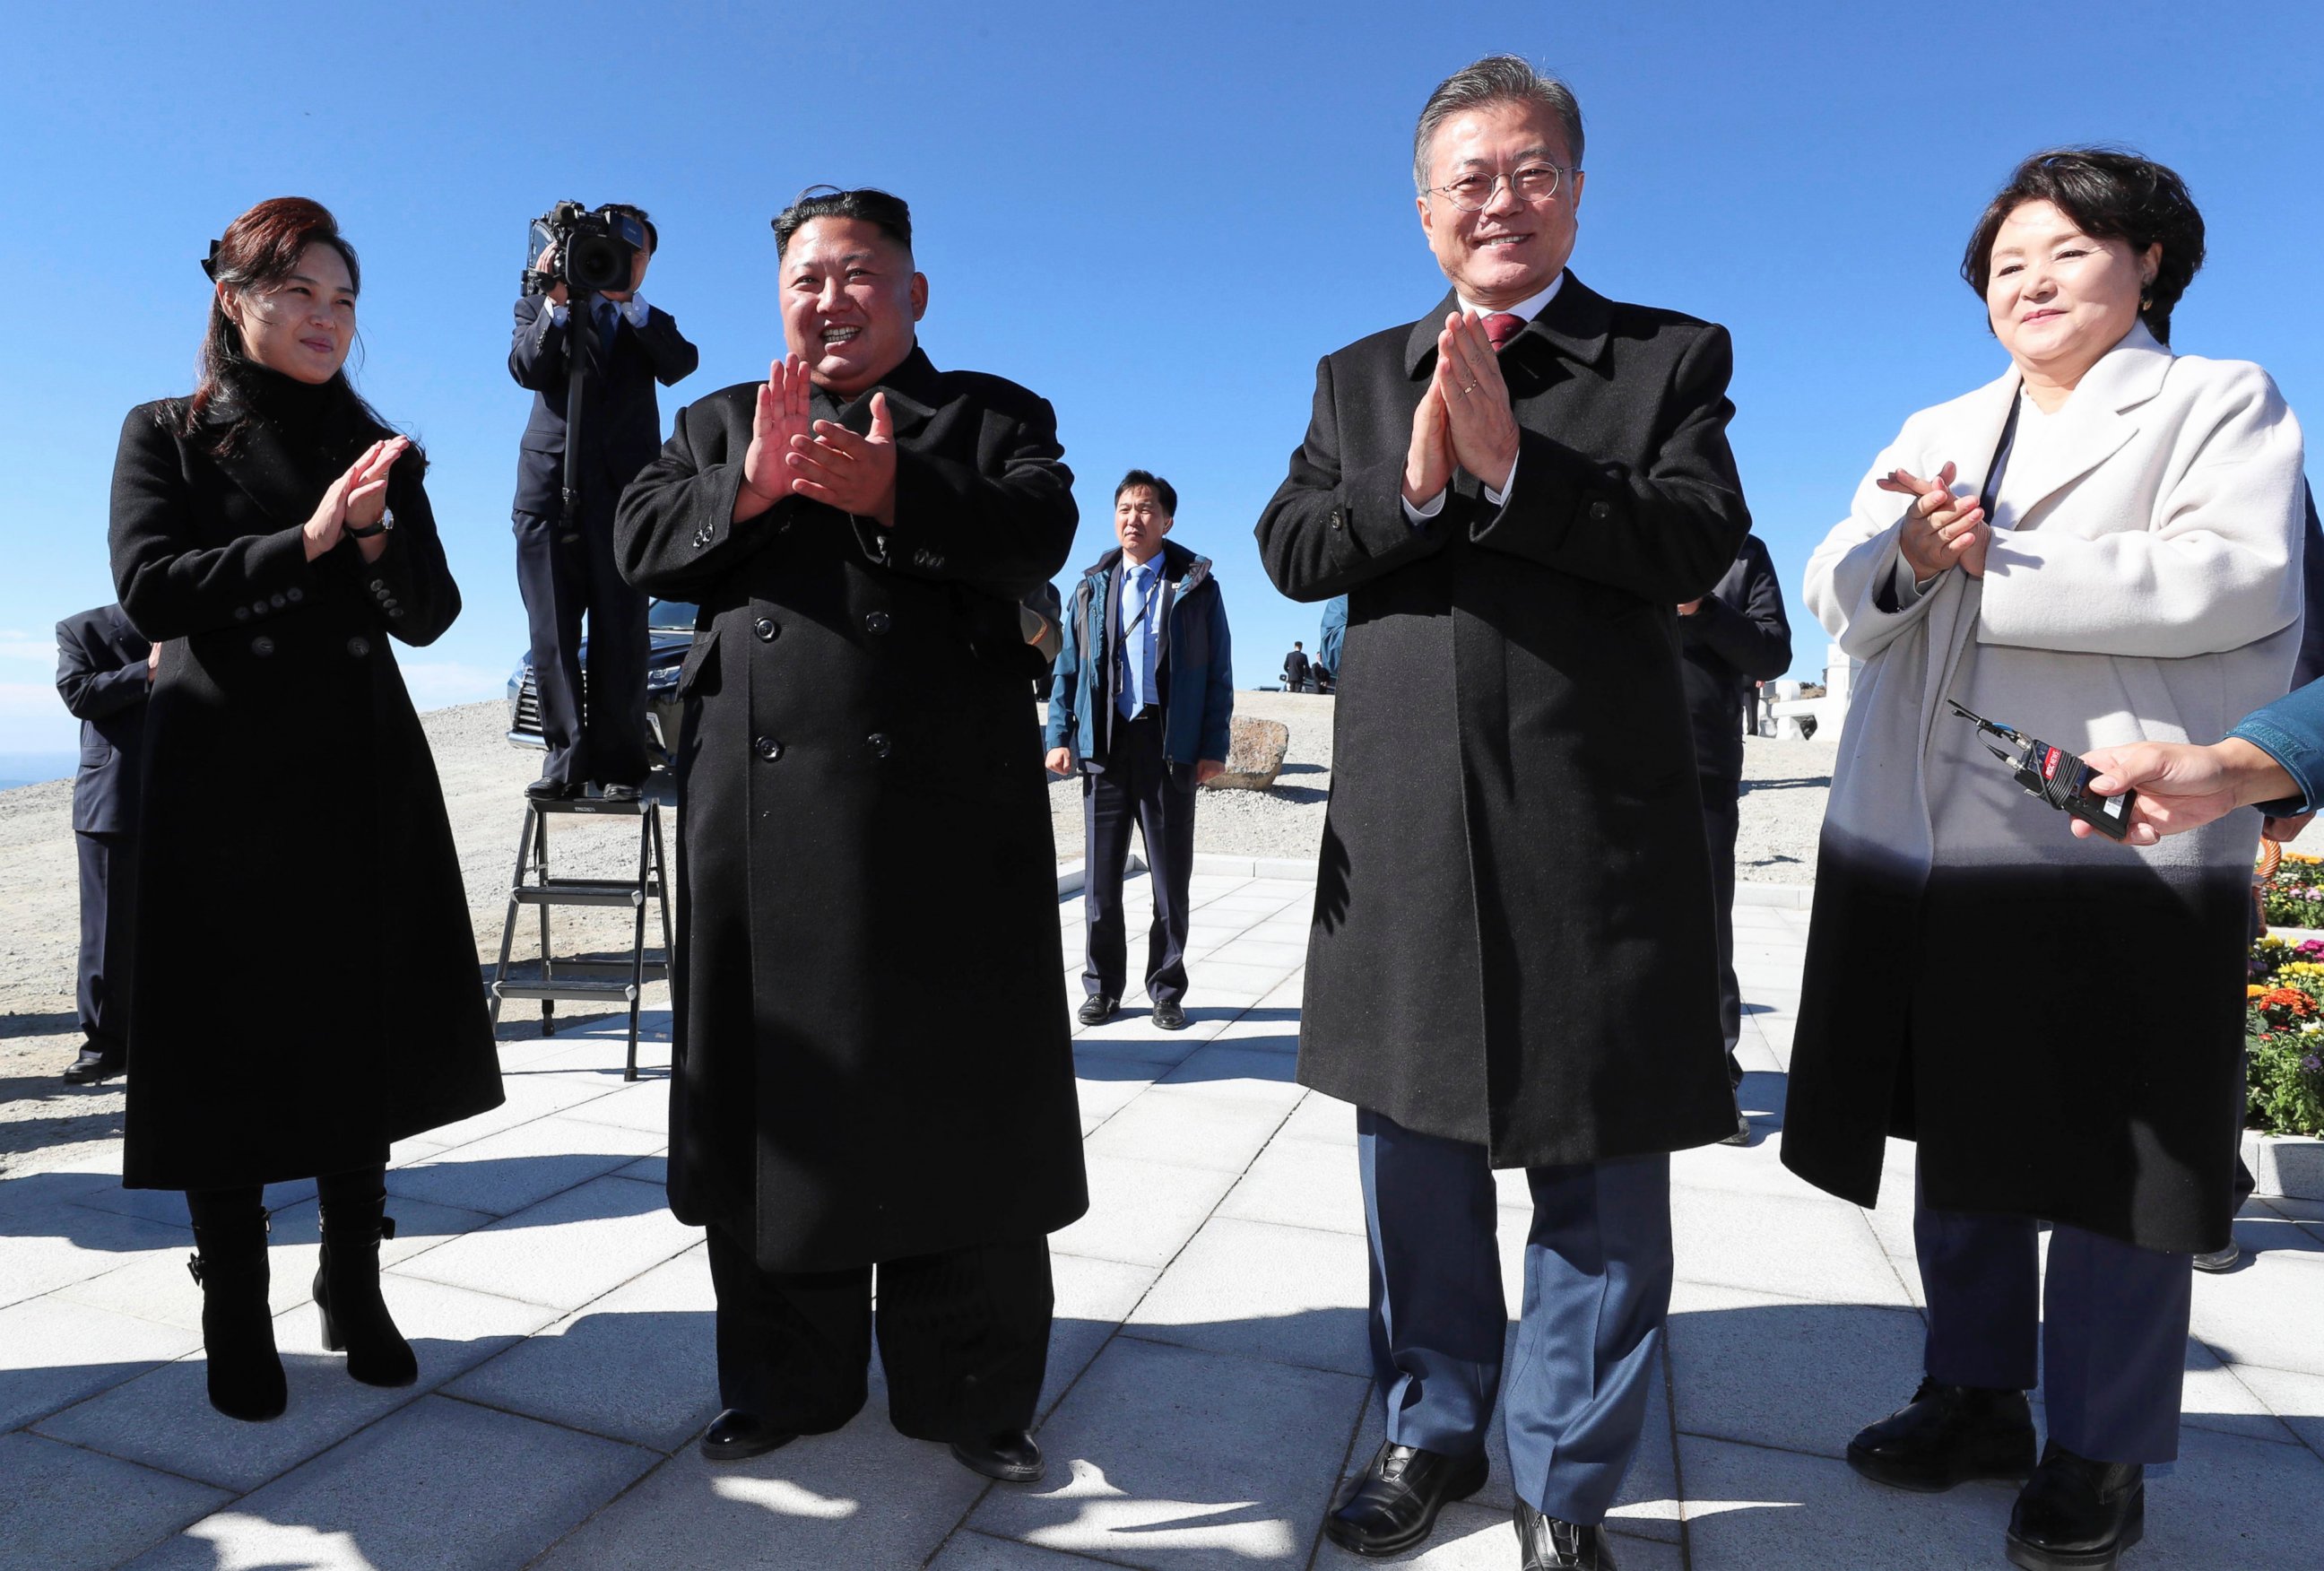 South Korean President Moon Jae-in, second from right, his wife Kim Jung-sook, right, North Korean leader Kim Jong Un, second from left, and his wife Ri Sol Ju clap hands on the Mount Paektu in North Korea on Thursday.